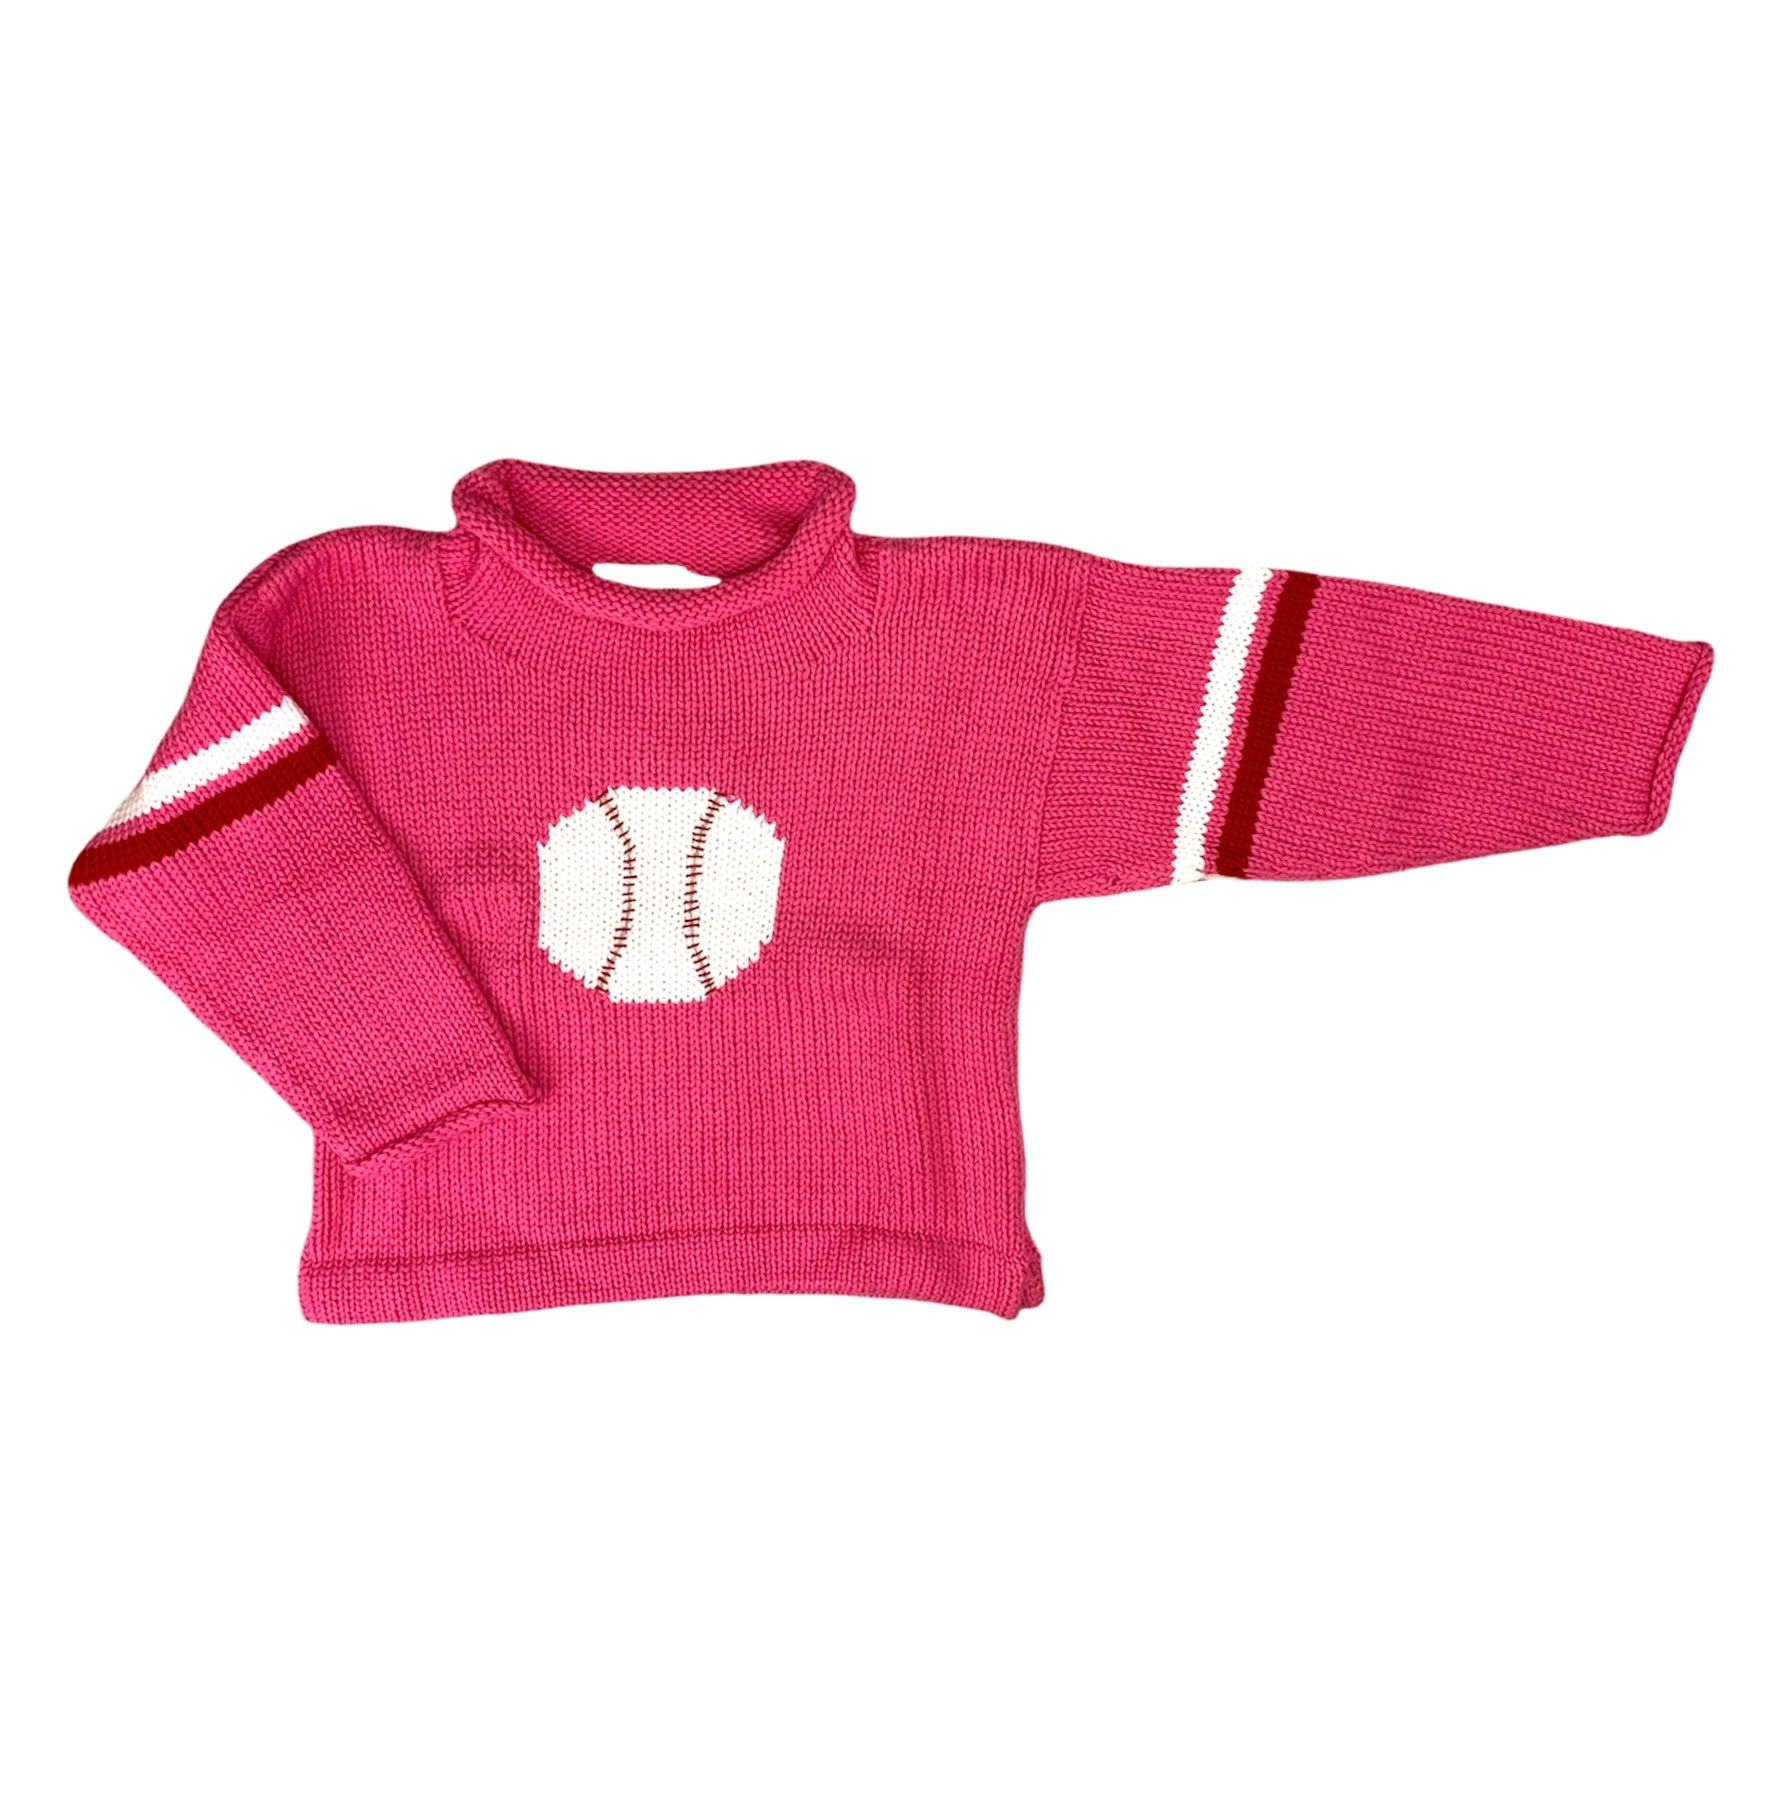 long sleeve pink sweater with white baseball in center, white and red stripe on each sleeve